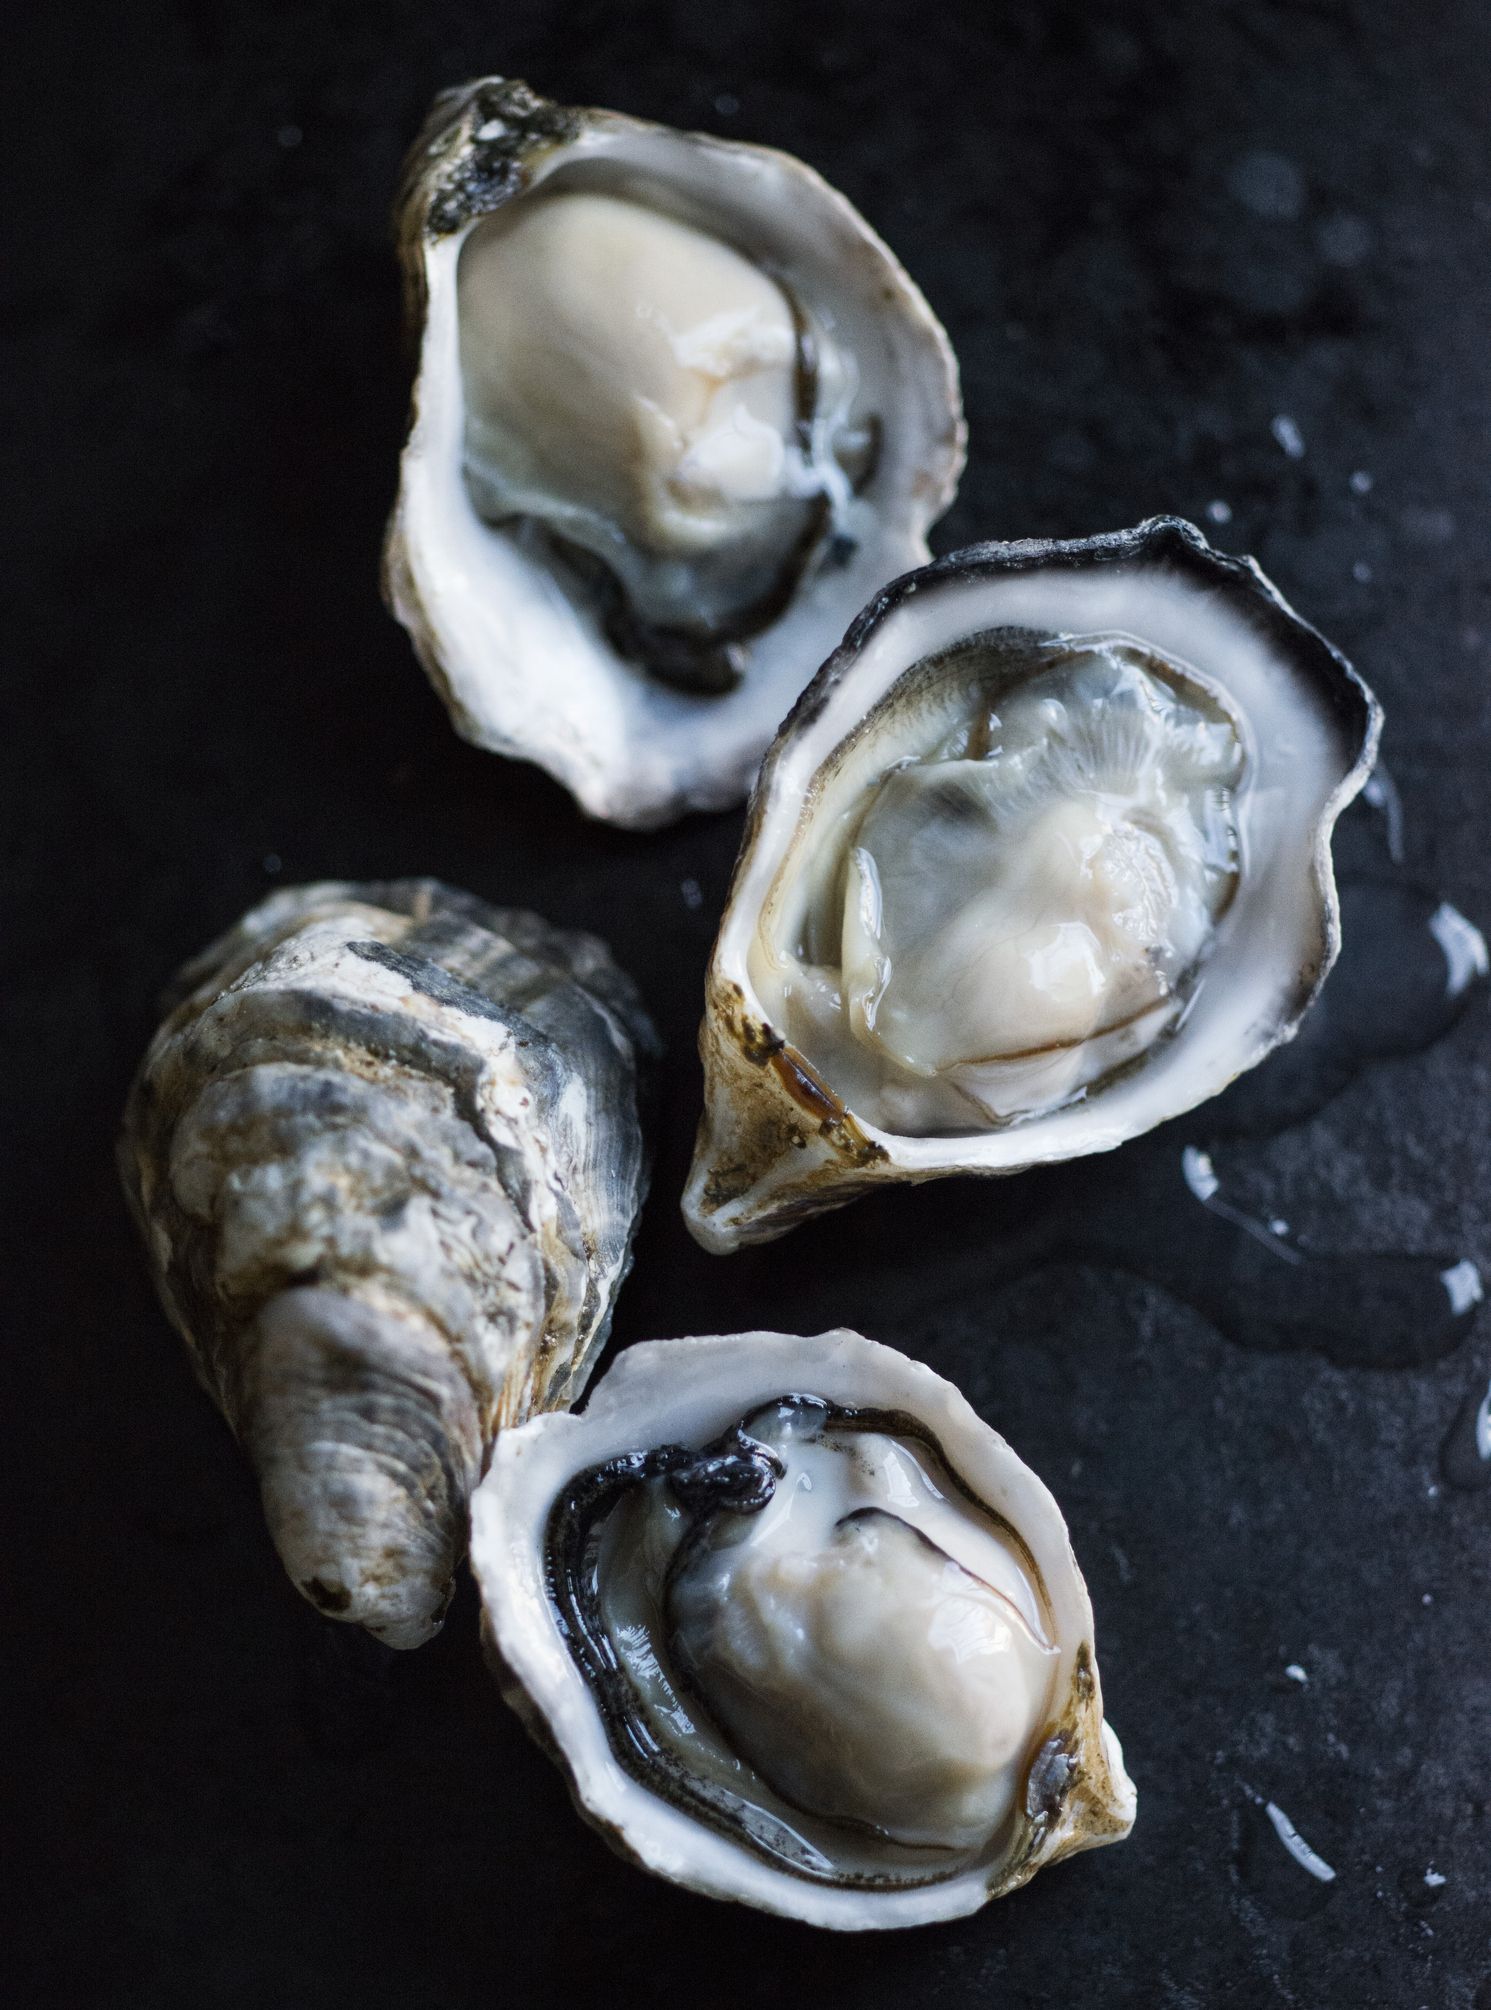  Oysters, Fresh oysters, Good  foods to eat